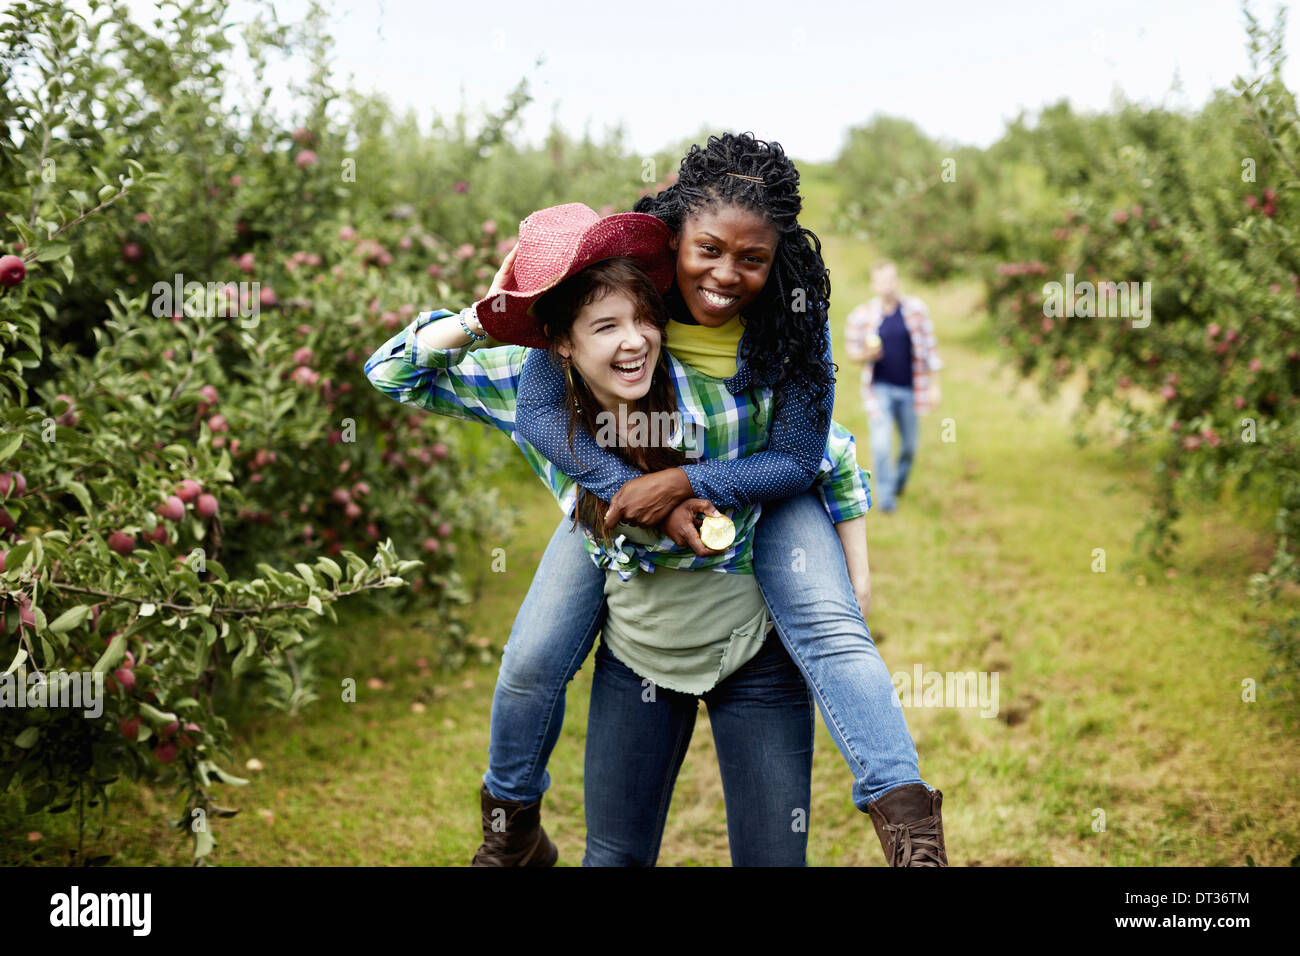 Rows of fruit trees in an organic orchard A young woman giving another a piggyback Stock Photo